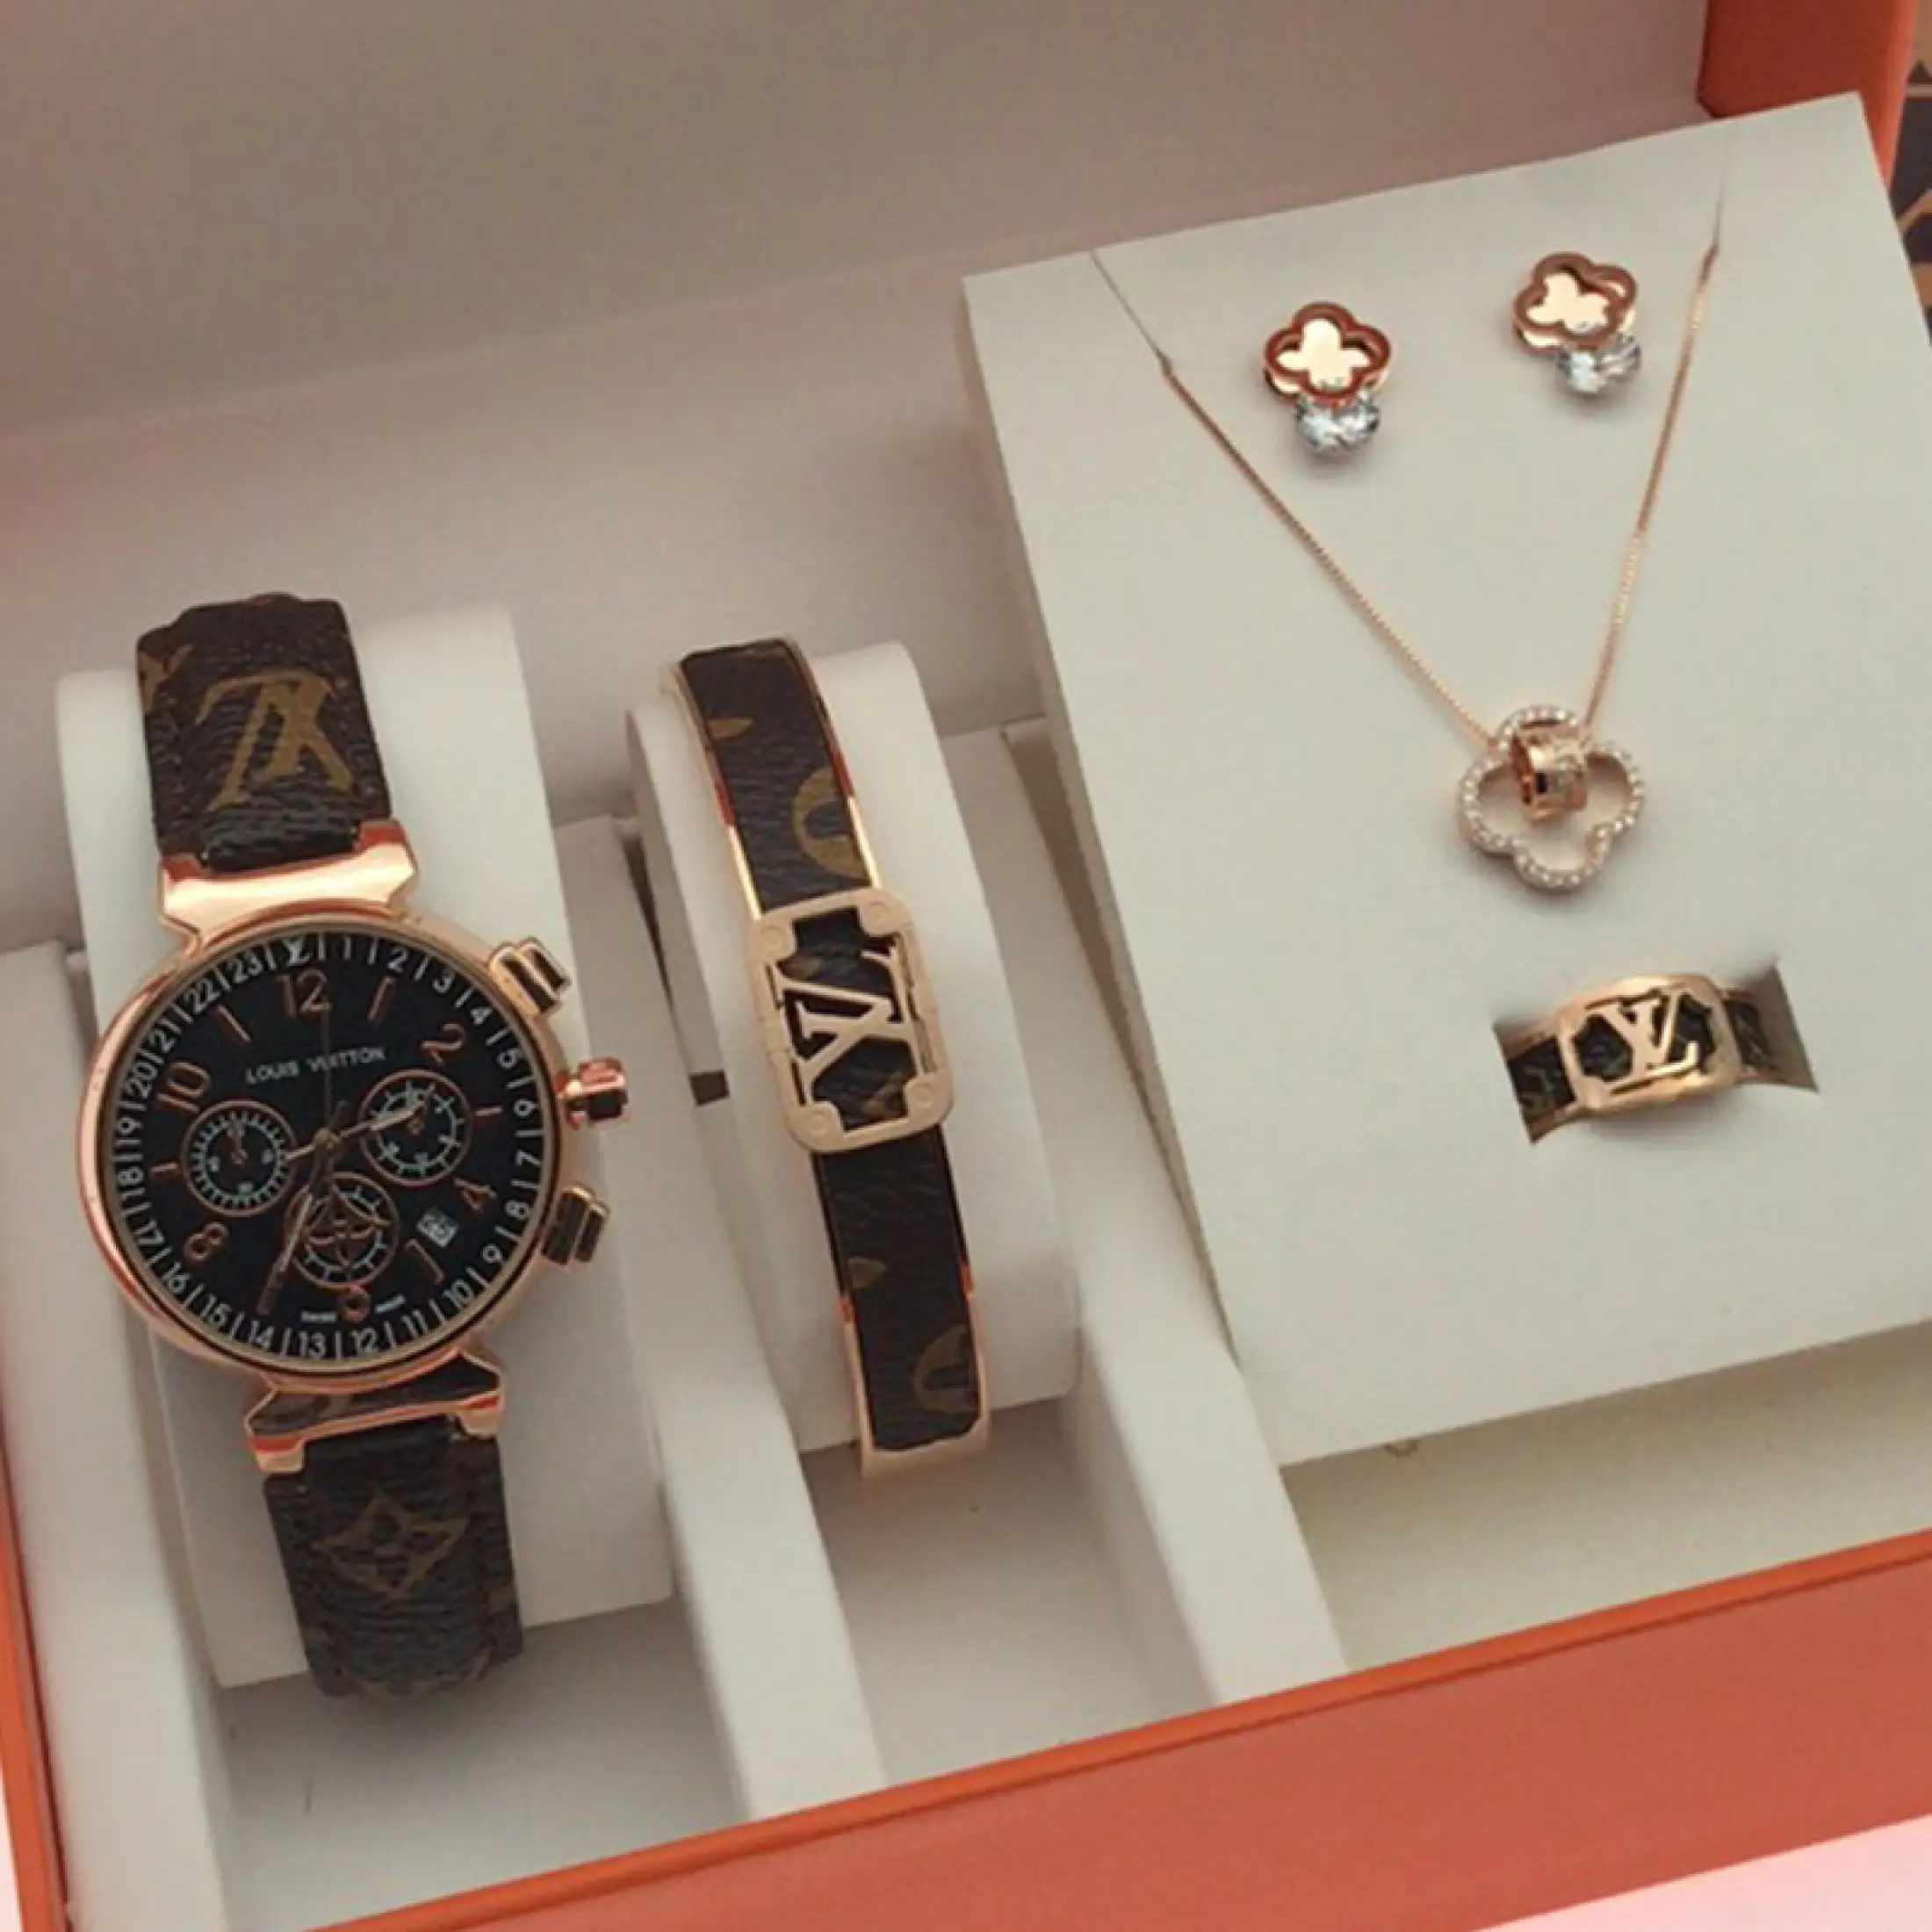 LV Watch 2020 Listing Watch Watch Set 5 In 1 Watch + Bracelet + Ring + + Necklace Jewelry 5 Piece Set Valentine'S Day Women'S Gift 2020 New Arrival